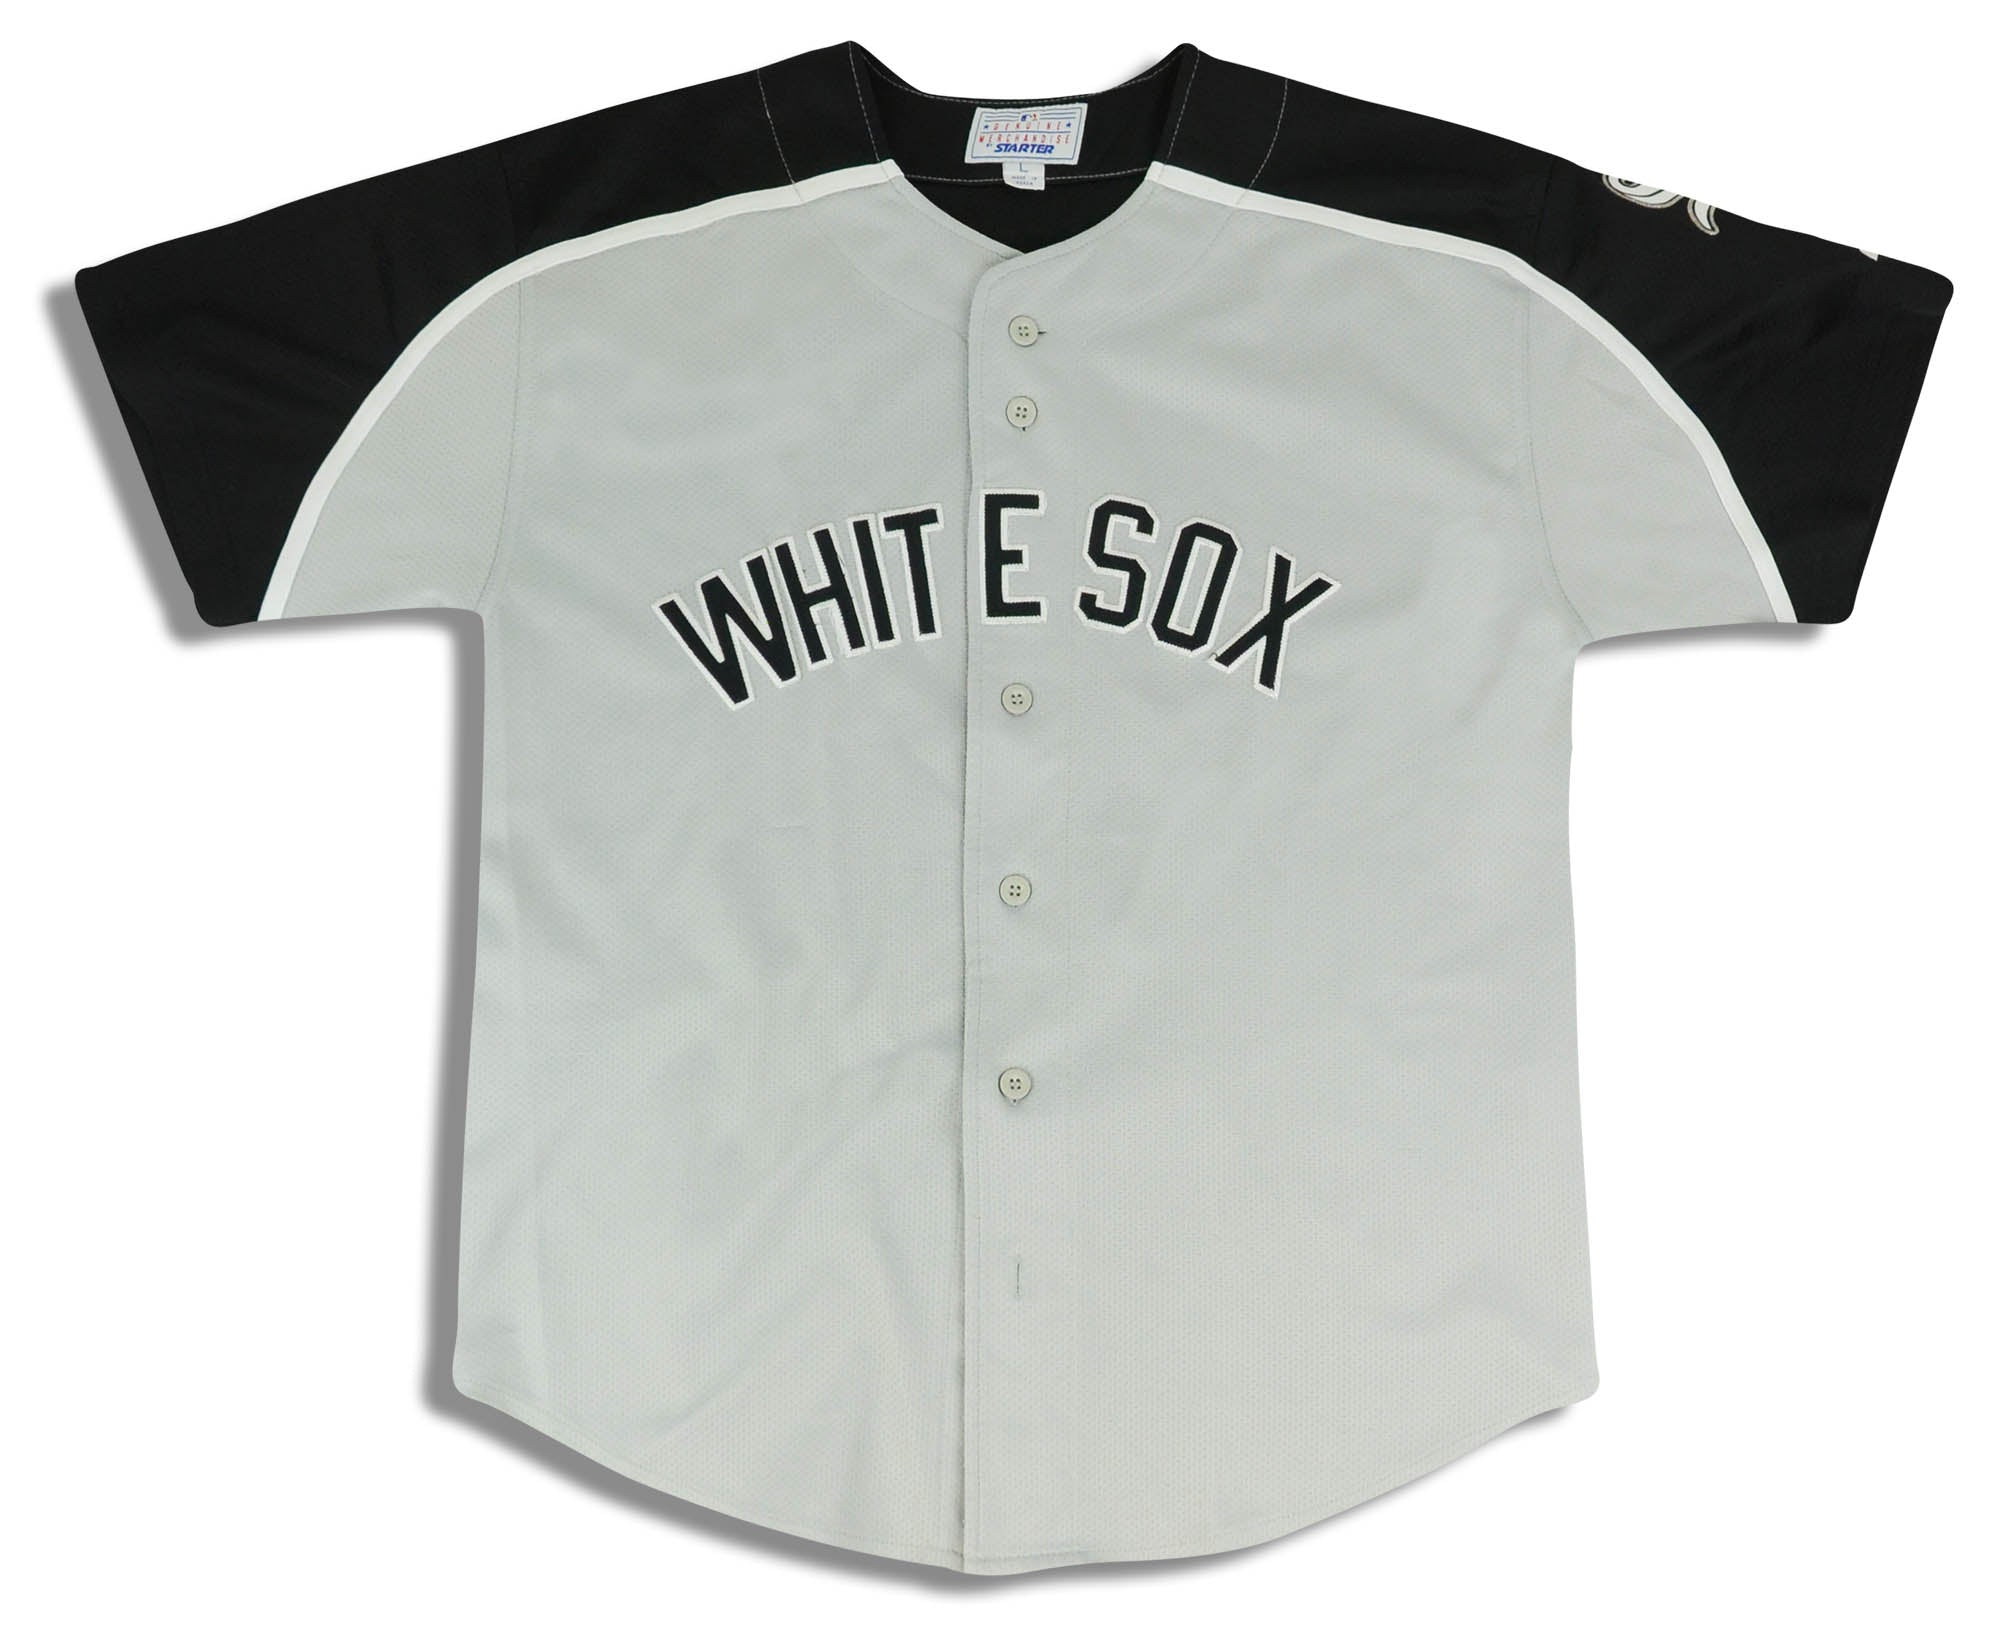 1990's CHICAGO WHITE SOX STARTER JERSEY L - Classic American Sports